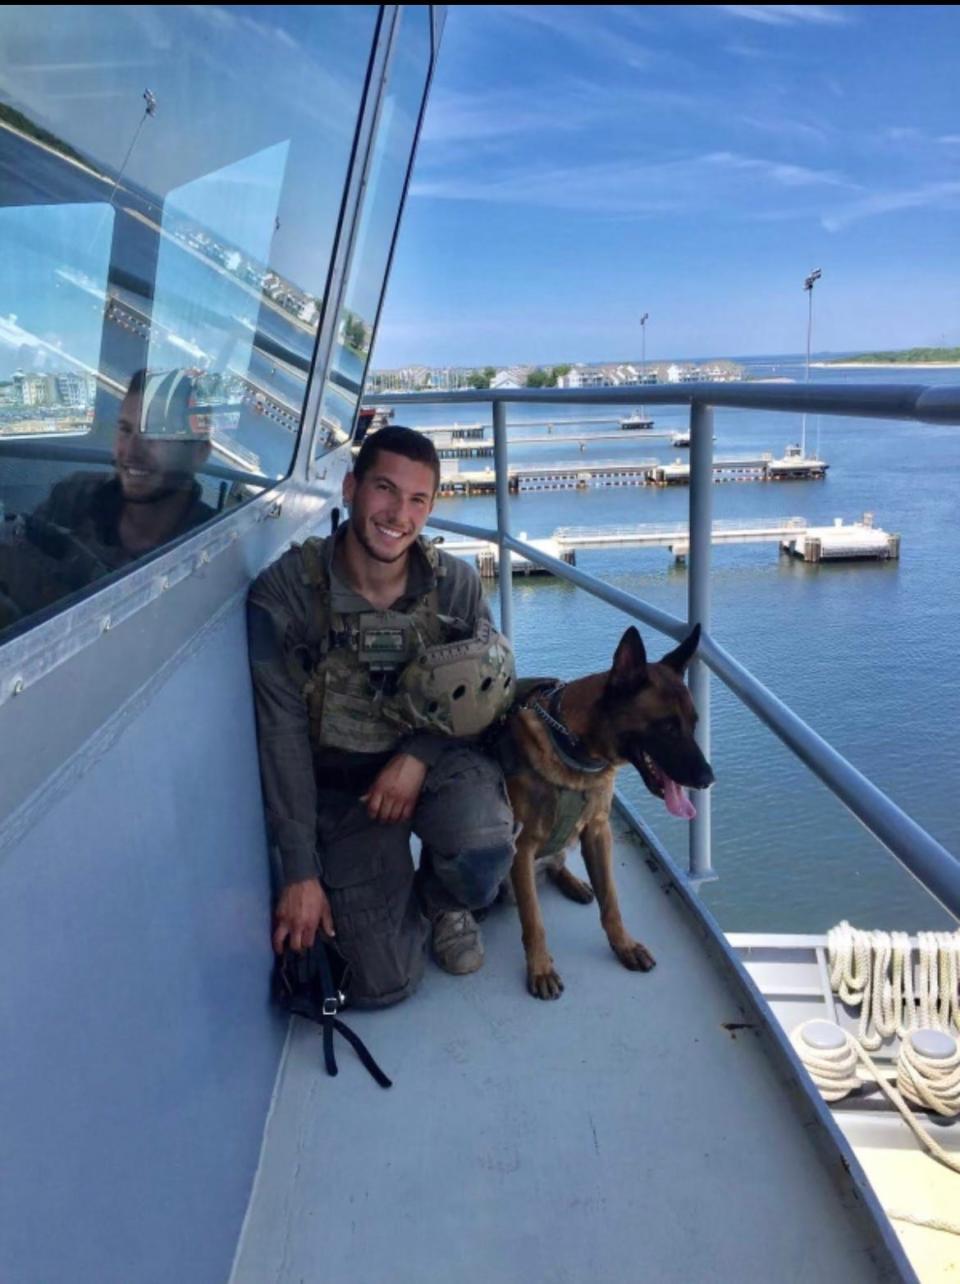 Aryeh Ziering, 27, was killed in Israel on Saturday after surprise attacks from terrorist group Hamas. He served as a captain in the canine unit of the Israel Defense Forces for six years.